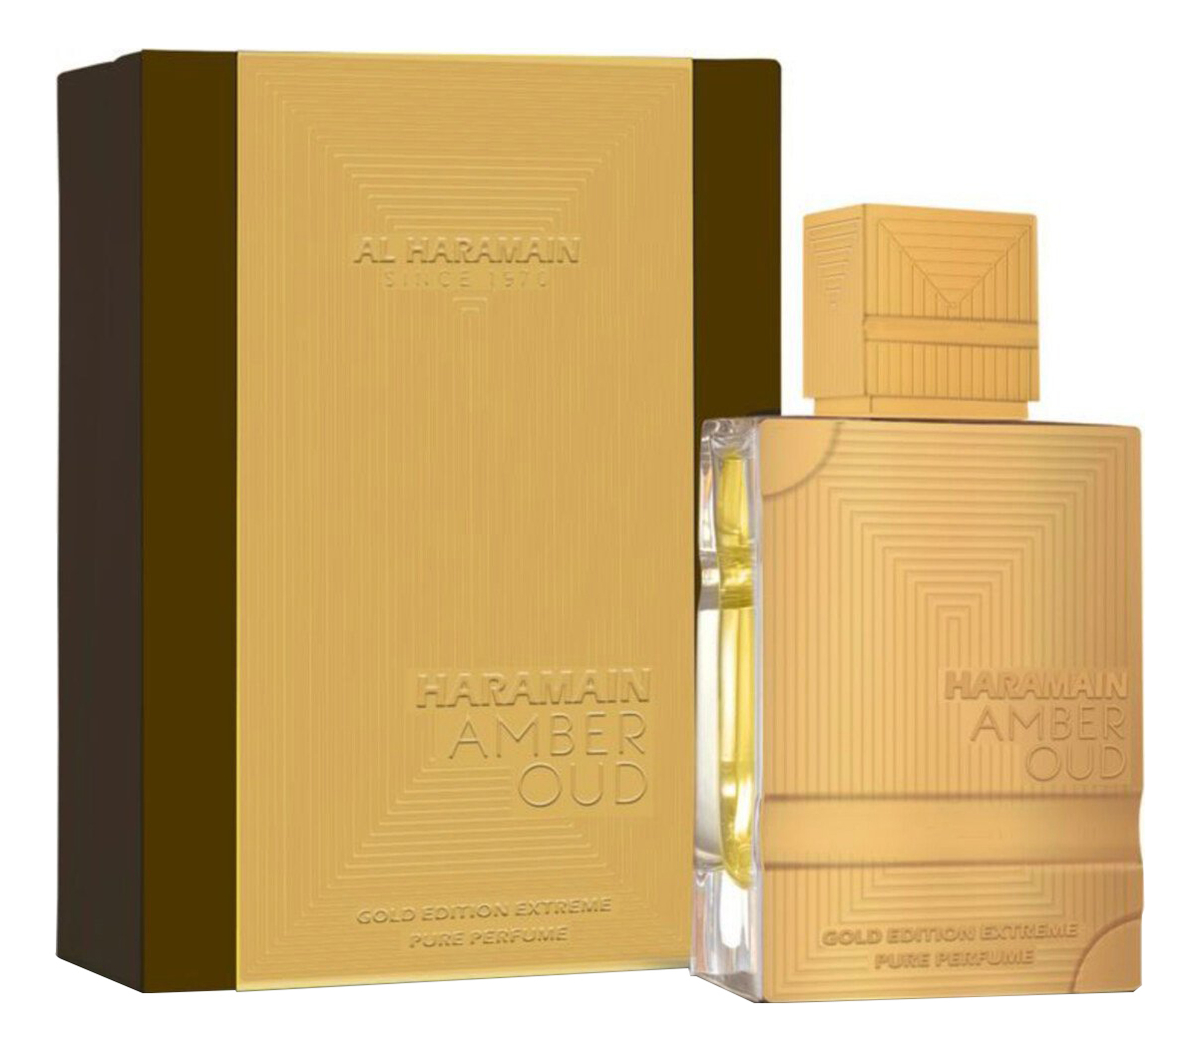 amber oud gold edition extreme парфюмерная вода 100мл Amber Oud Gold Edition Extreme: парфюмерная вода 100мл